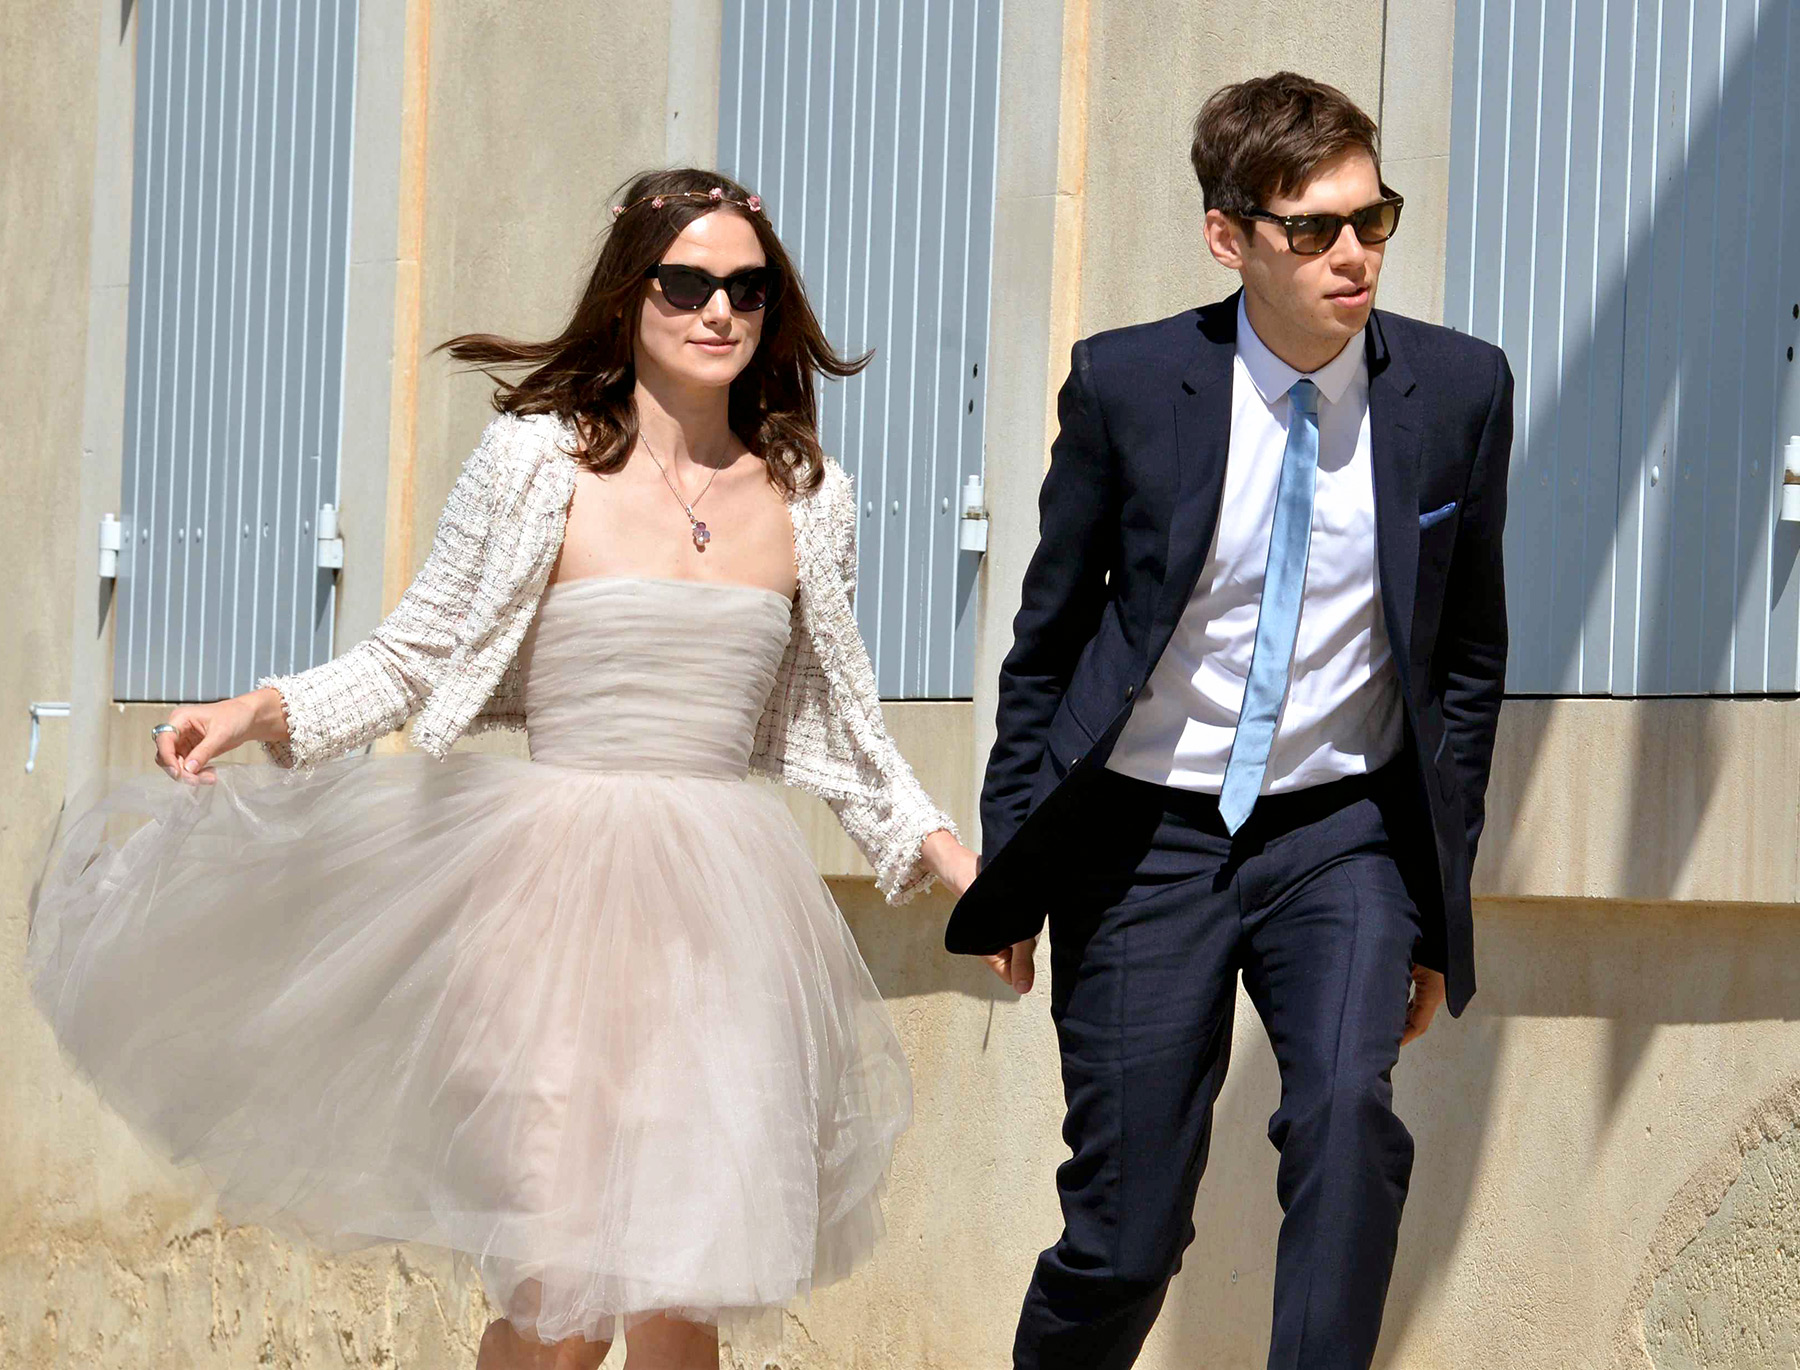 Keira Knightley wed muso James Righton in an intimate ceremony in France